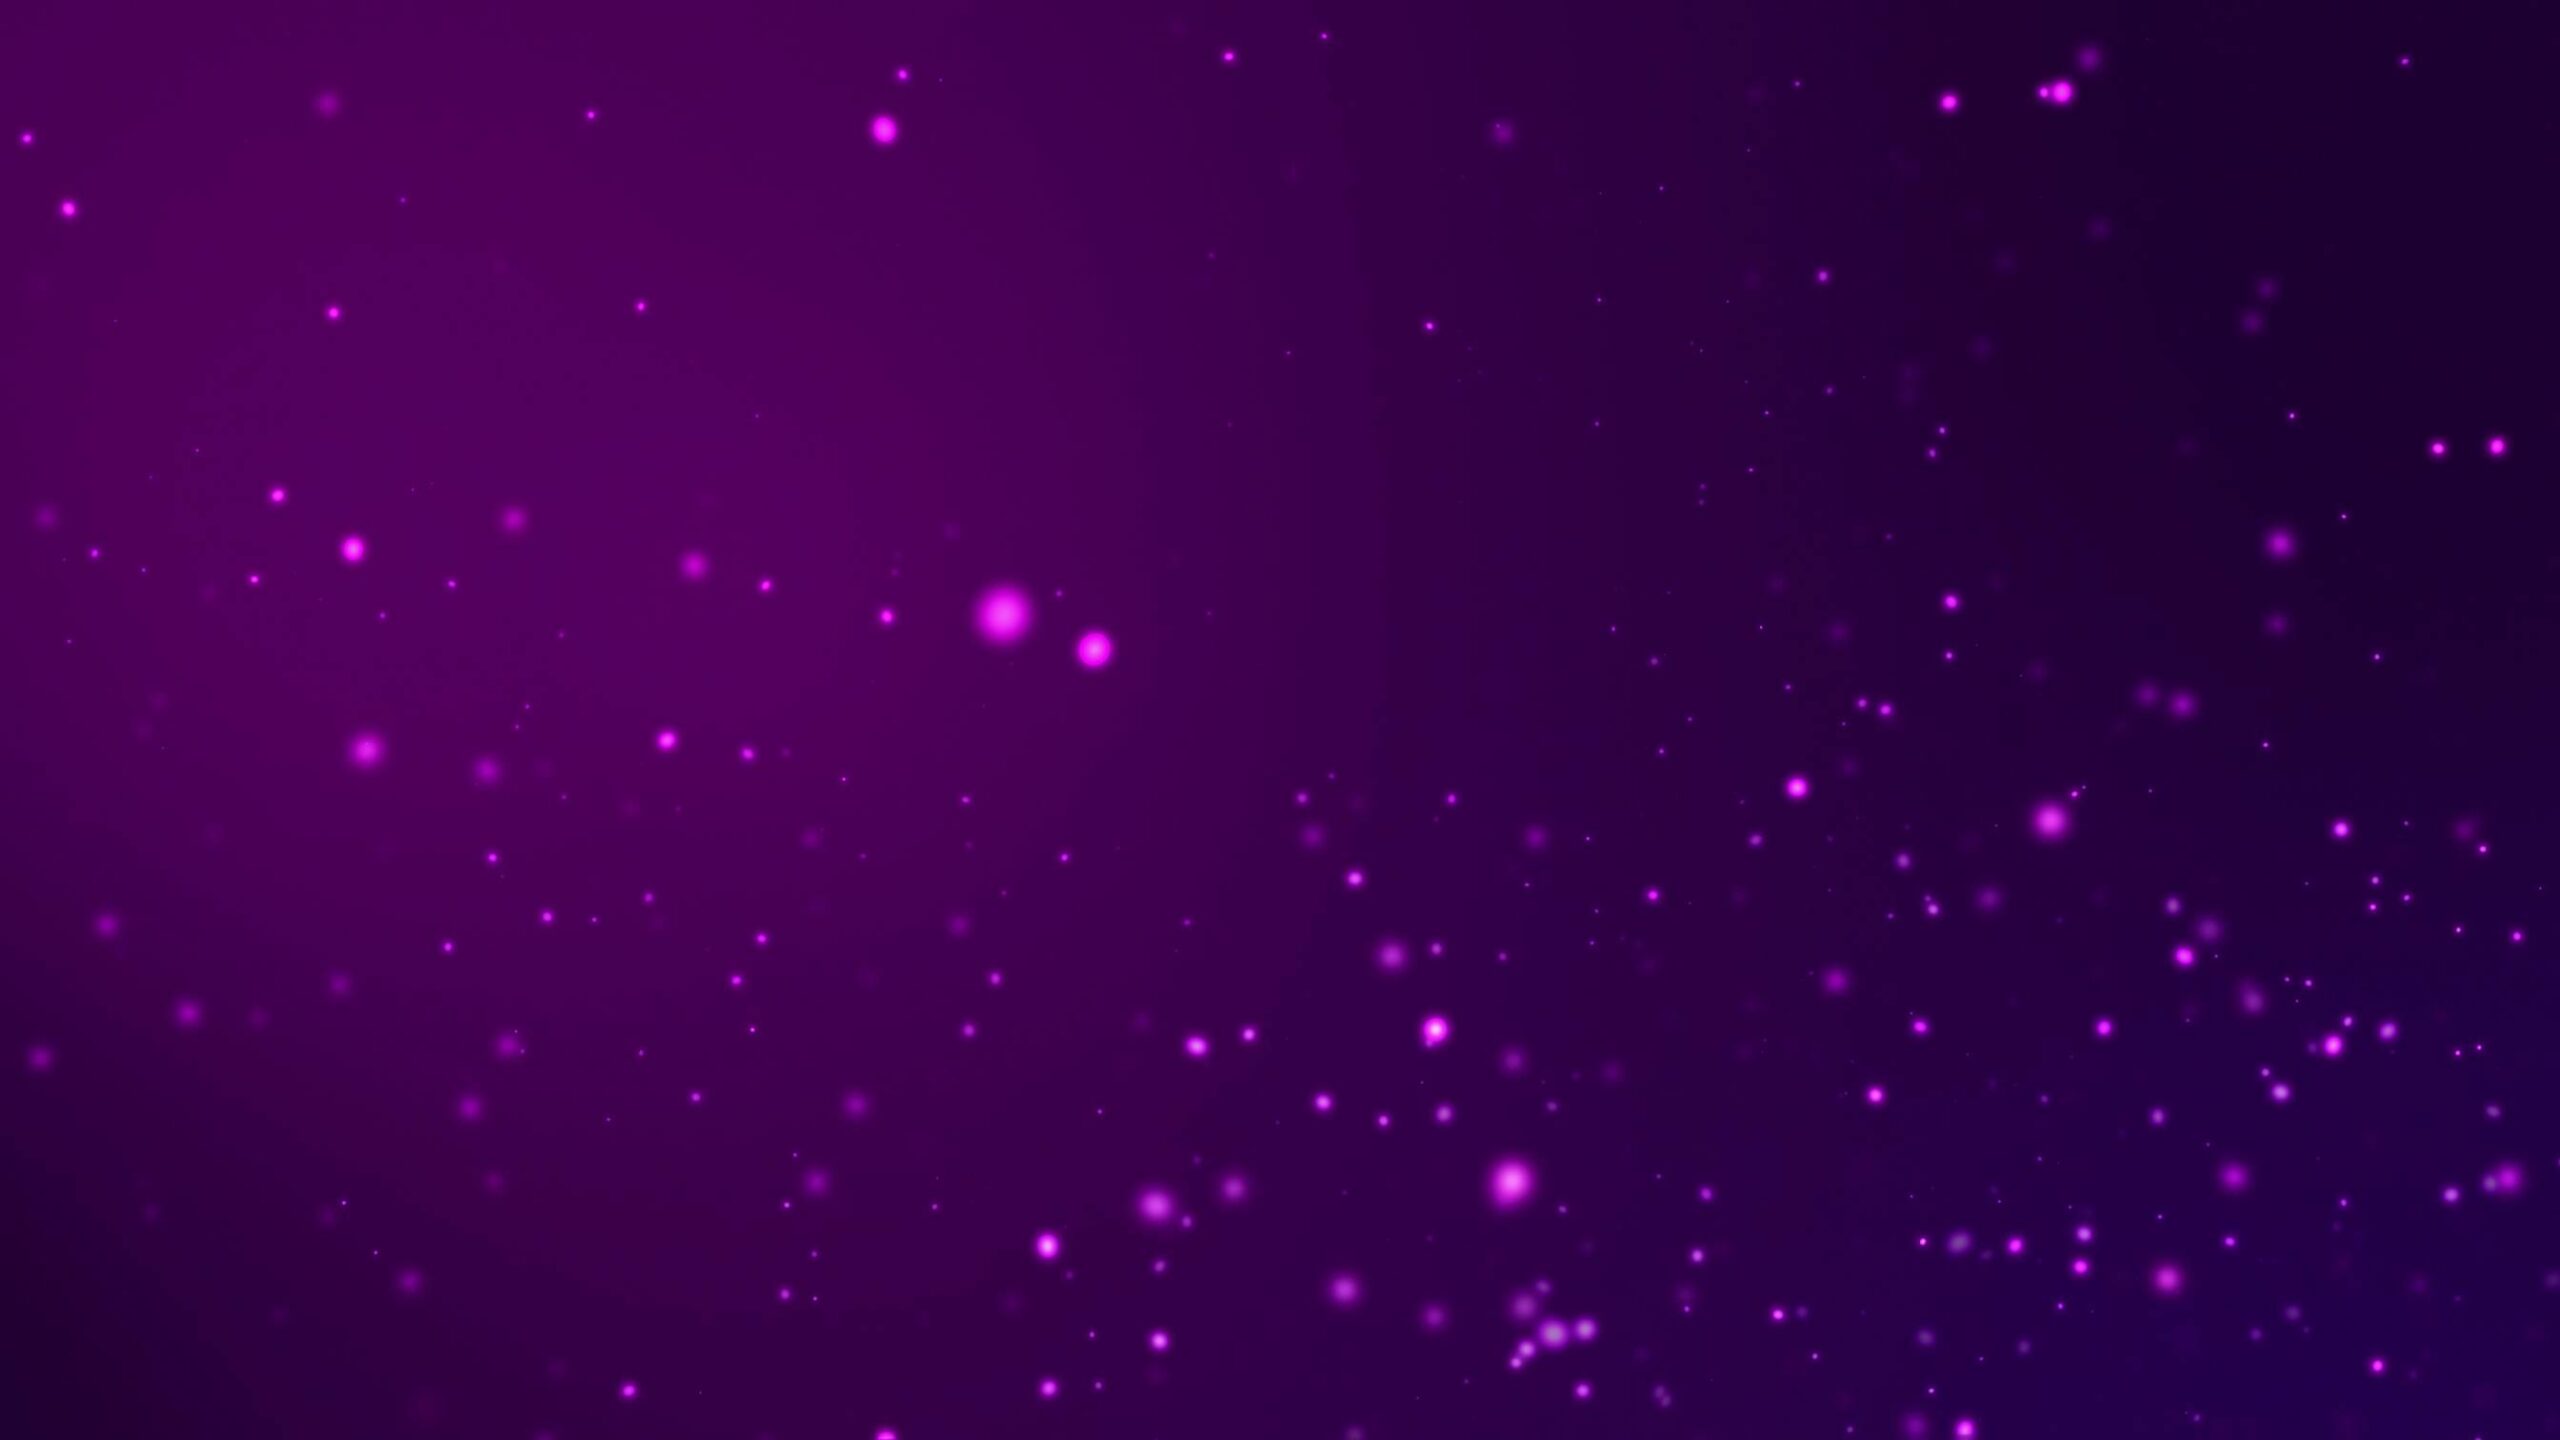 4K Glowing Purple Particles Motion Background || Free UHD Screensaver || Free Download